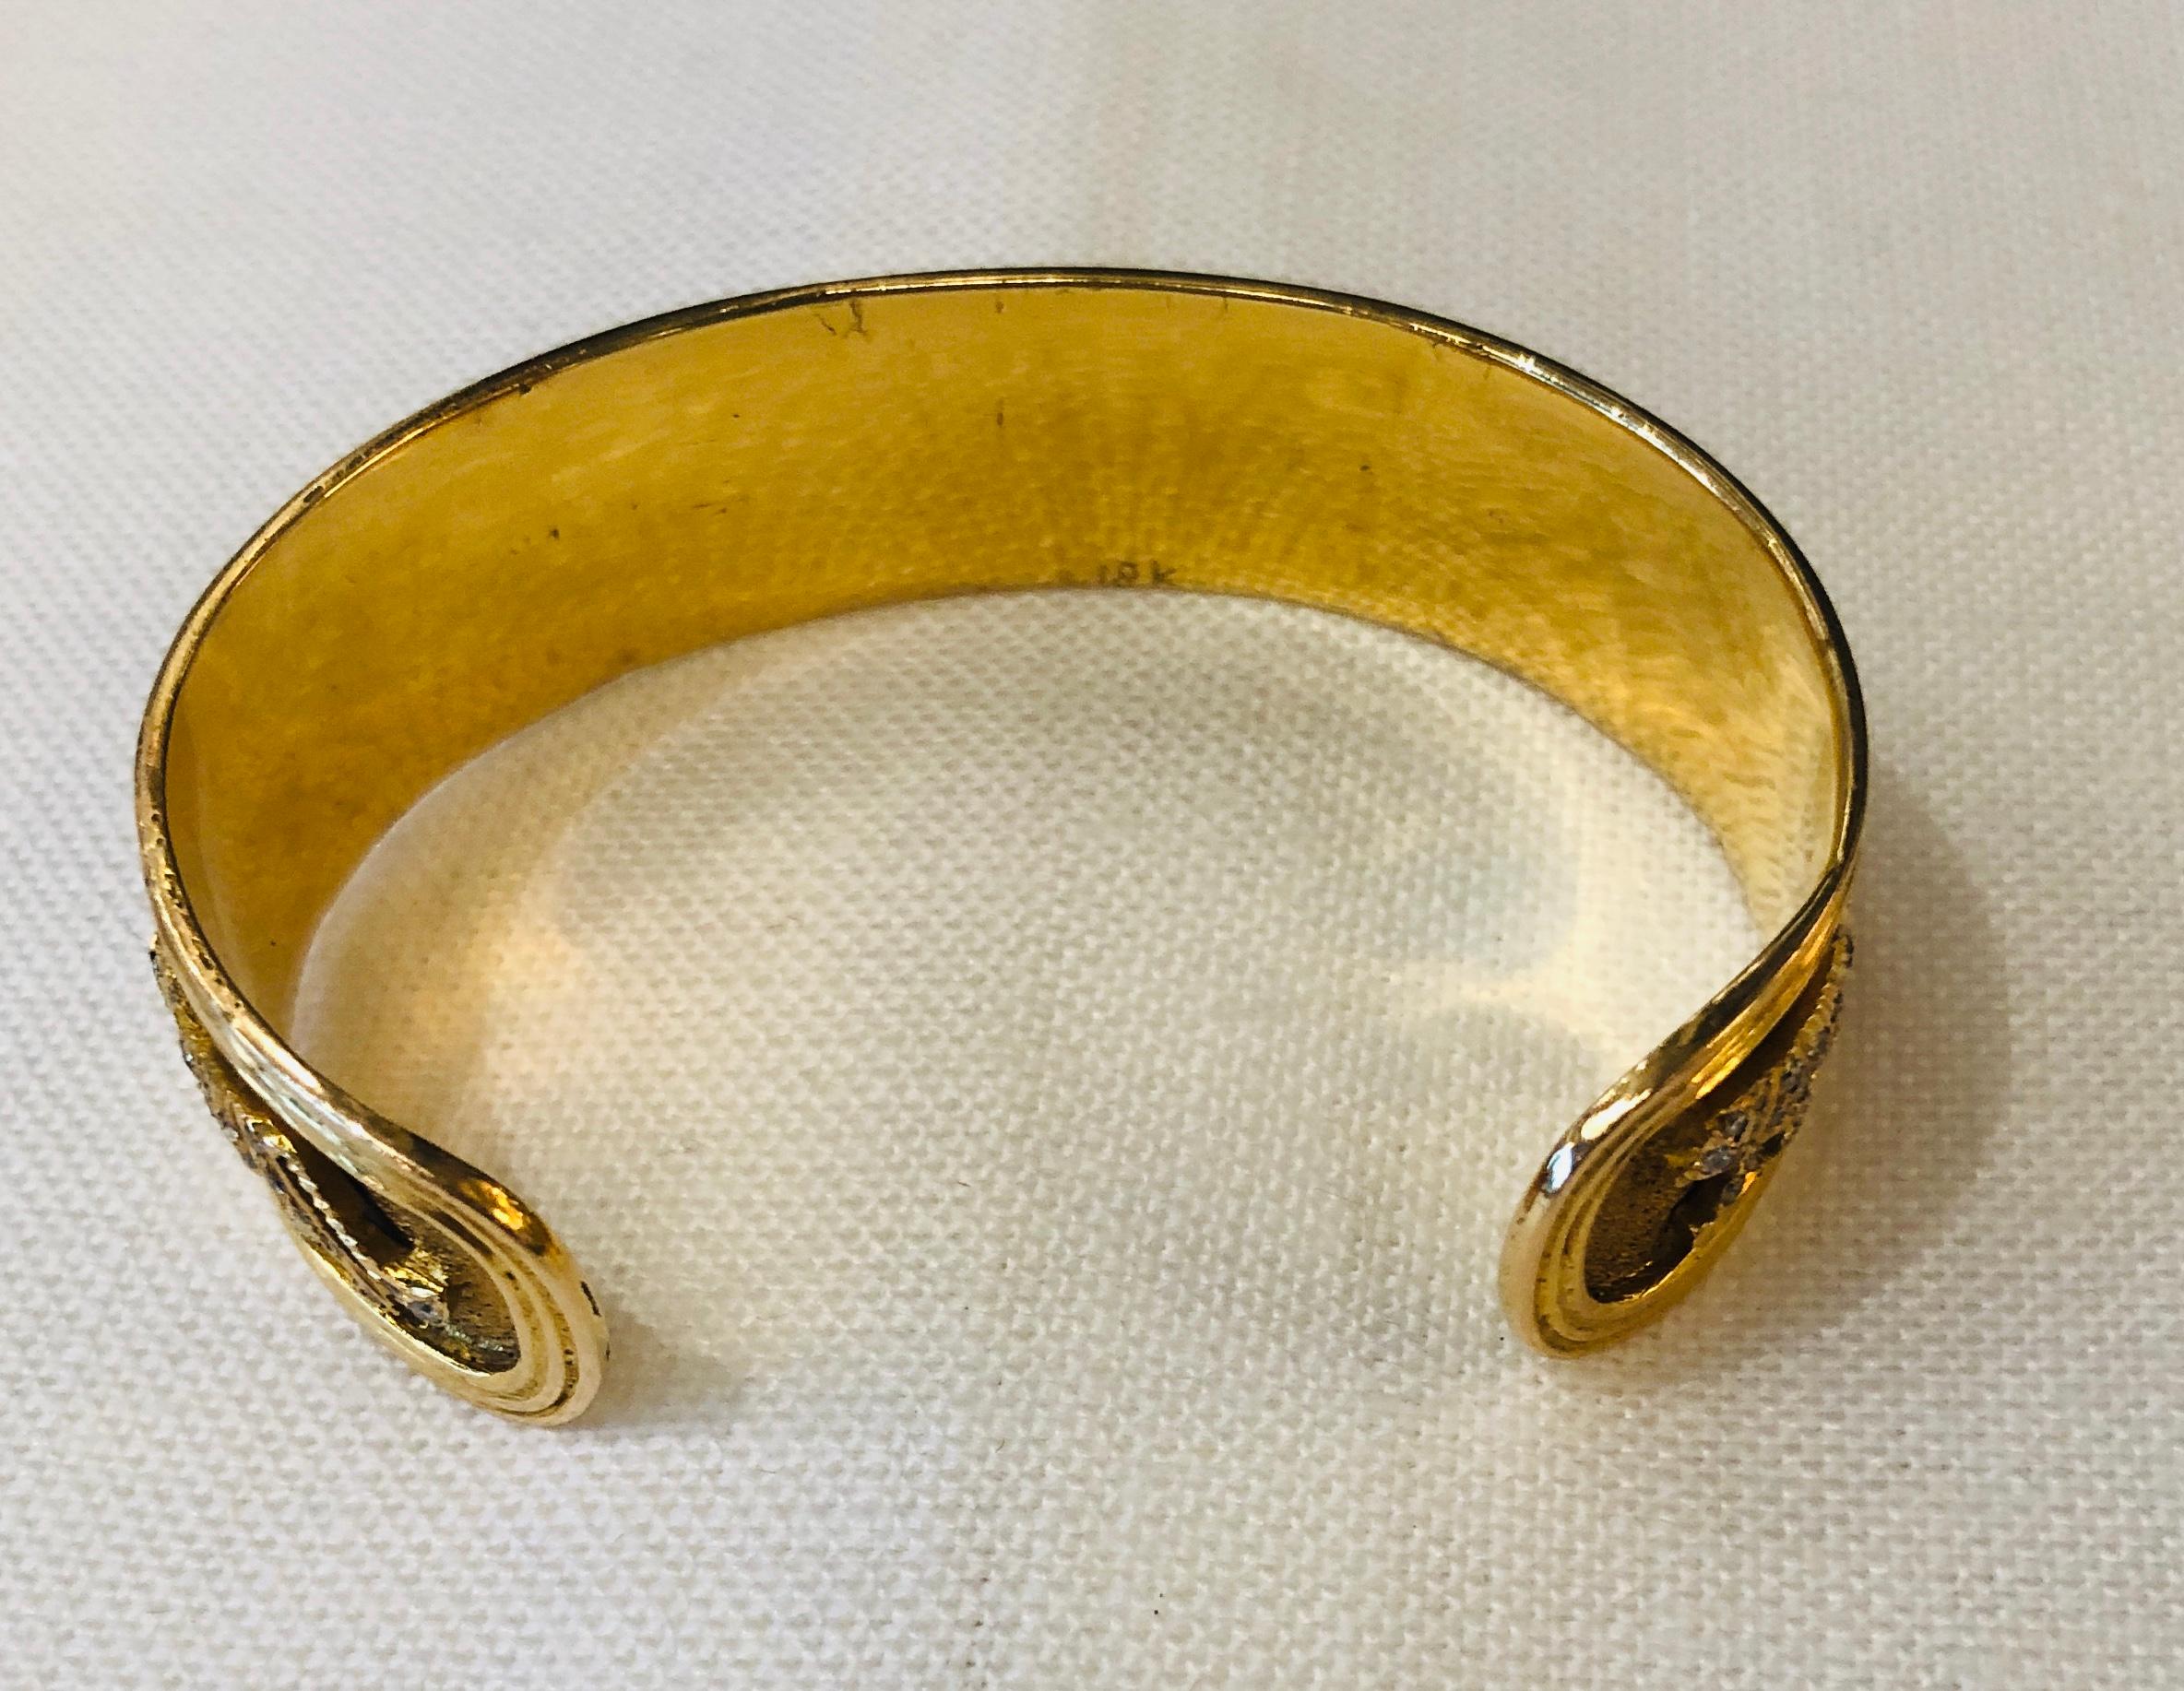 Offered is a 20th century stamped 18-karat yellow gold with diamond encrusted panthers motif cuff bracelet. The cuff is bordered by two shiny gold bands on the top and the bottom. Inside the bands are seven diamond encrusted gold panthers with a